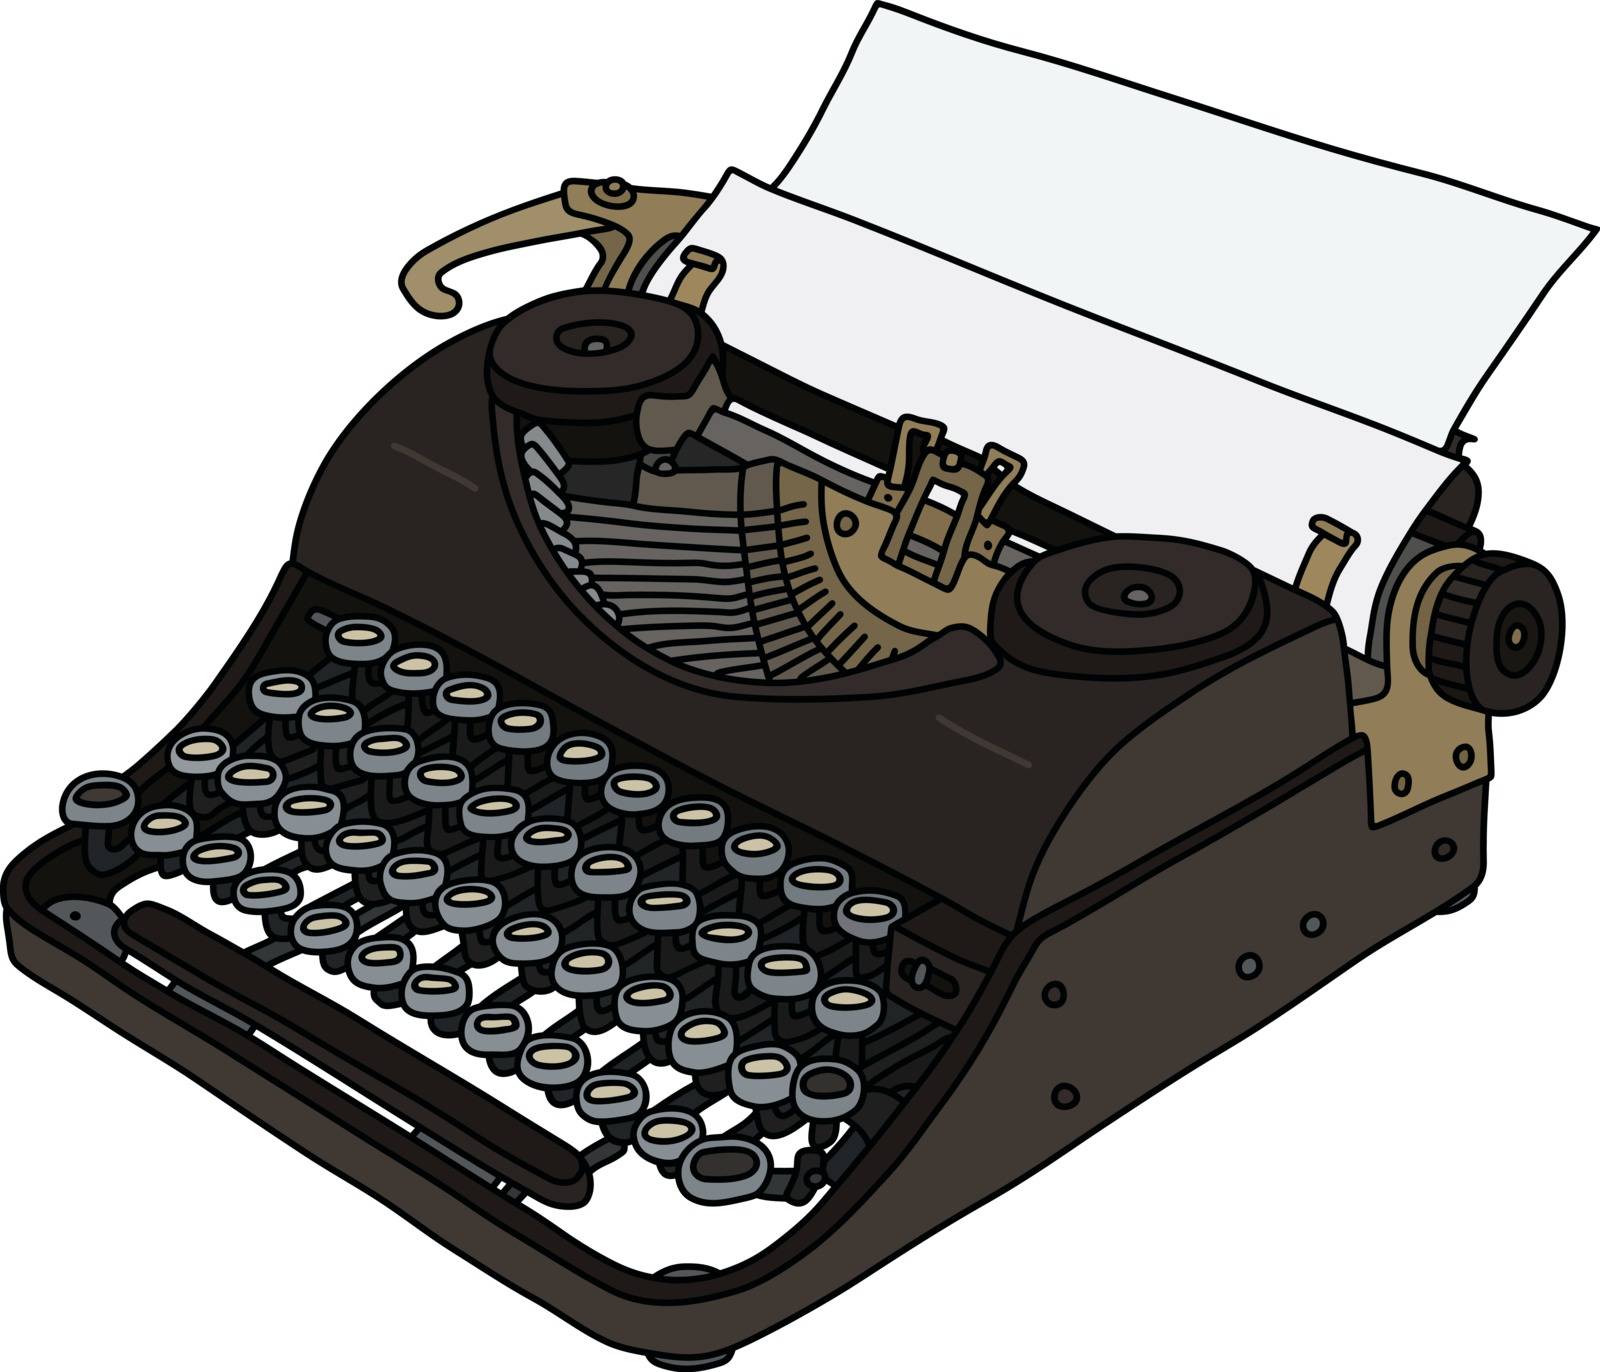 The vectorized hand drawing of a vintage portable typewriter